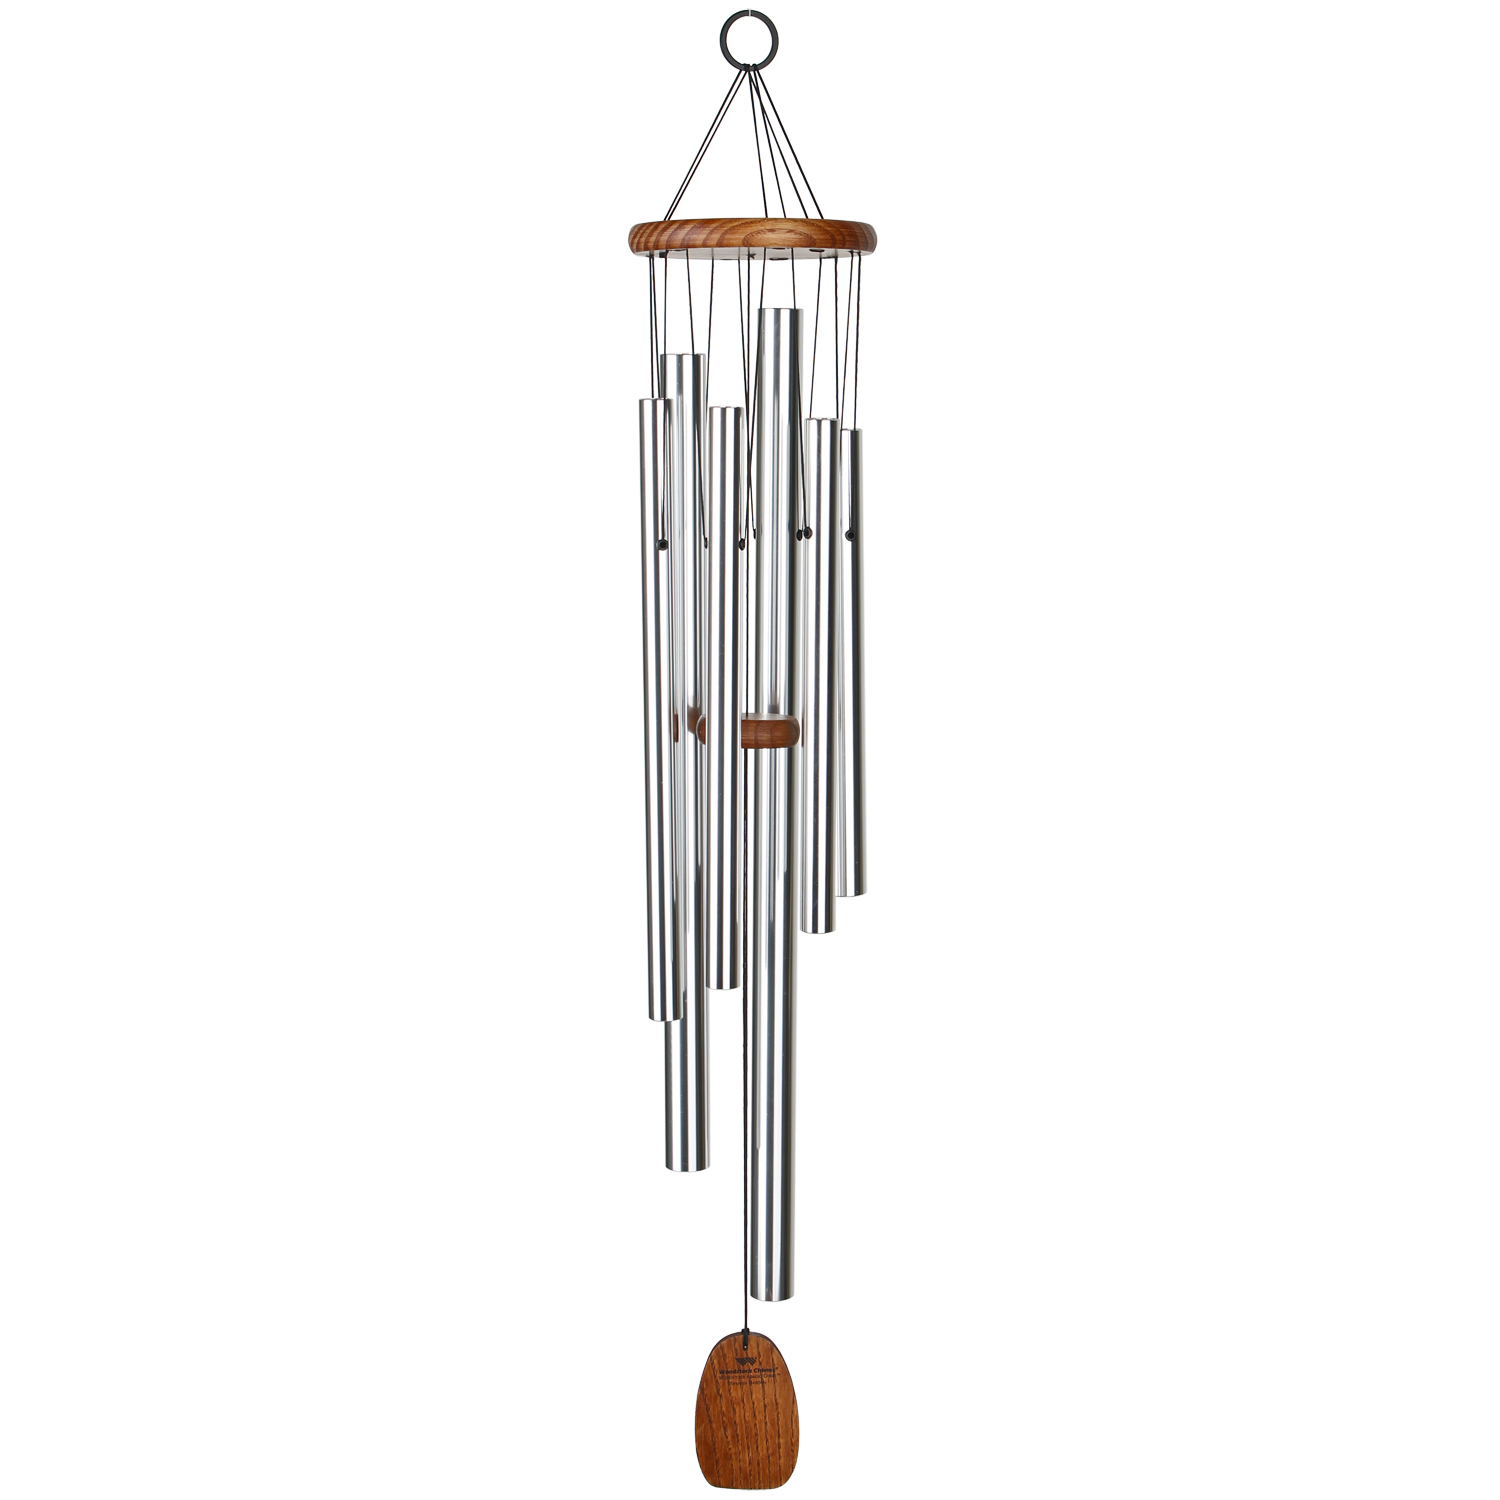 Sound Room | Woodstock Wind Chimes